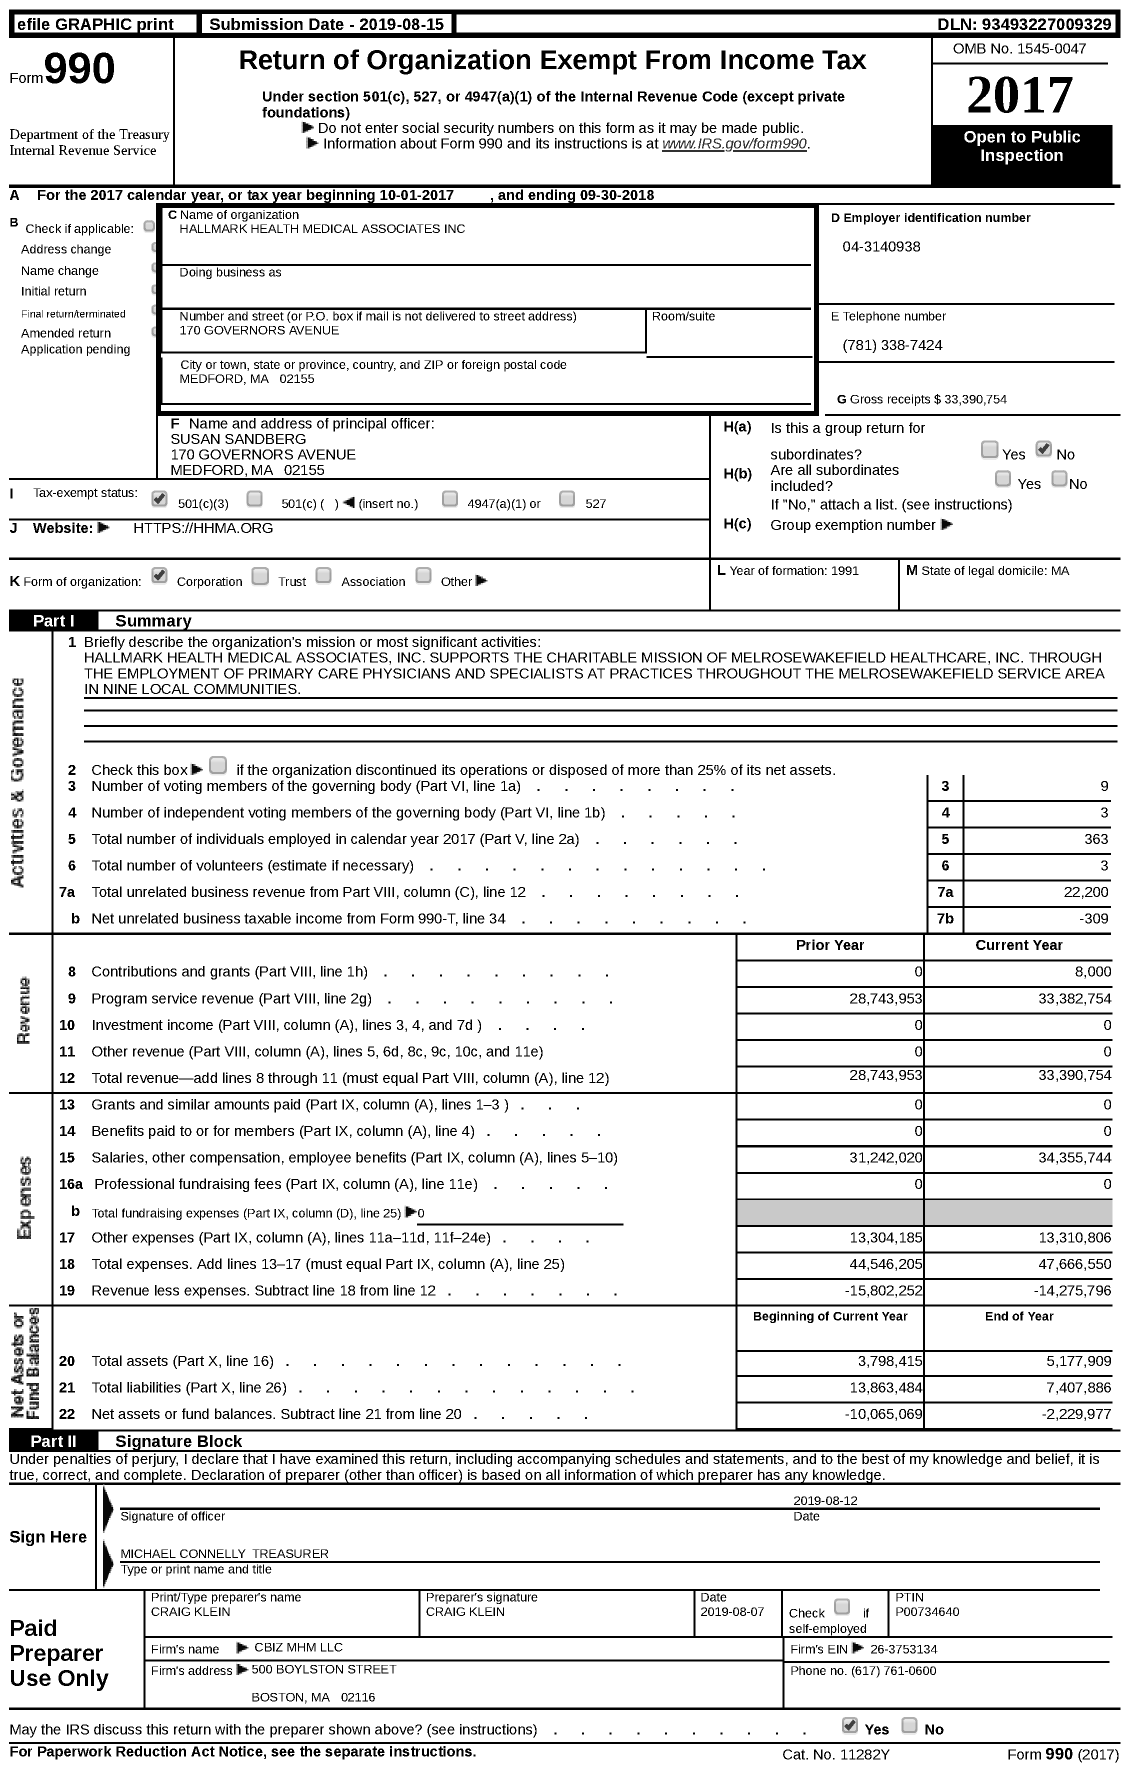 Image of first page of 2017 Form 990 for Hallmark Health Medical Associates (HHMA)